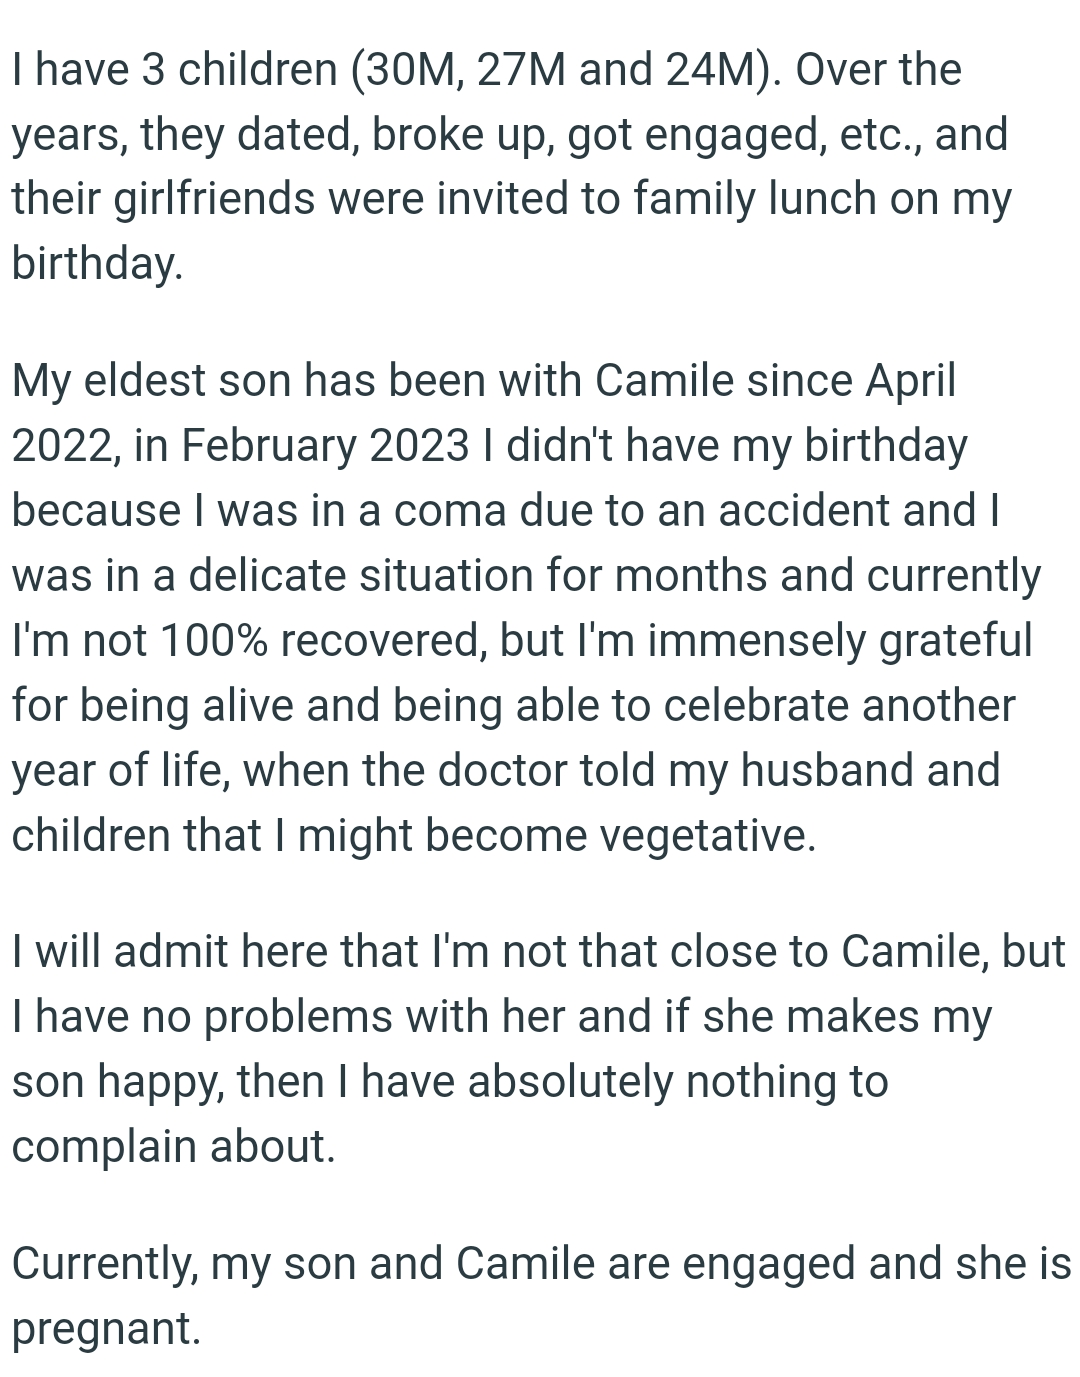 The OP always invited her Kids' girlfriends to family lunch on her birthday